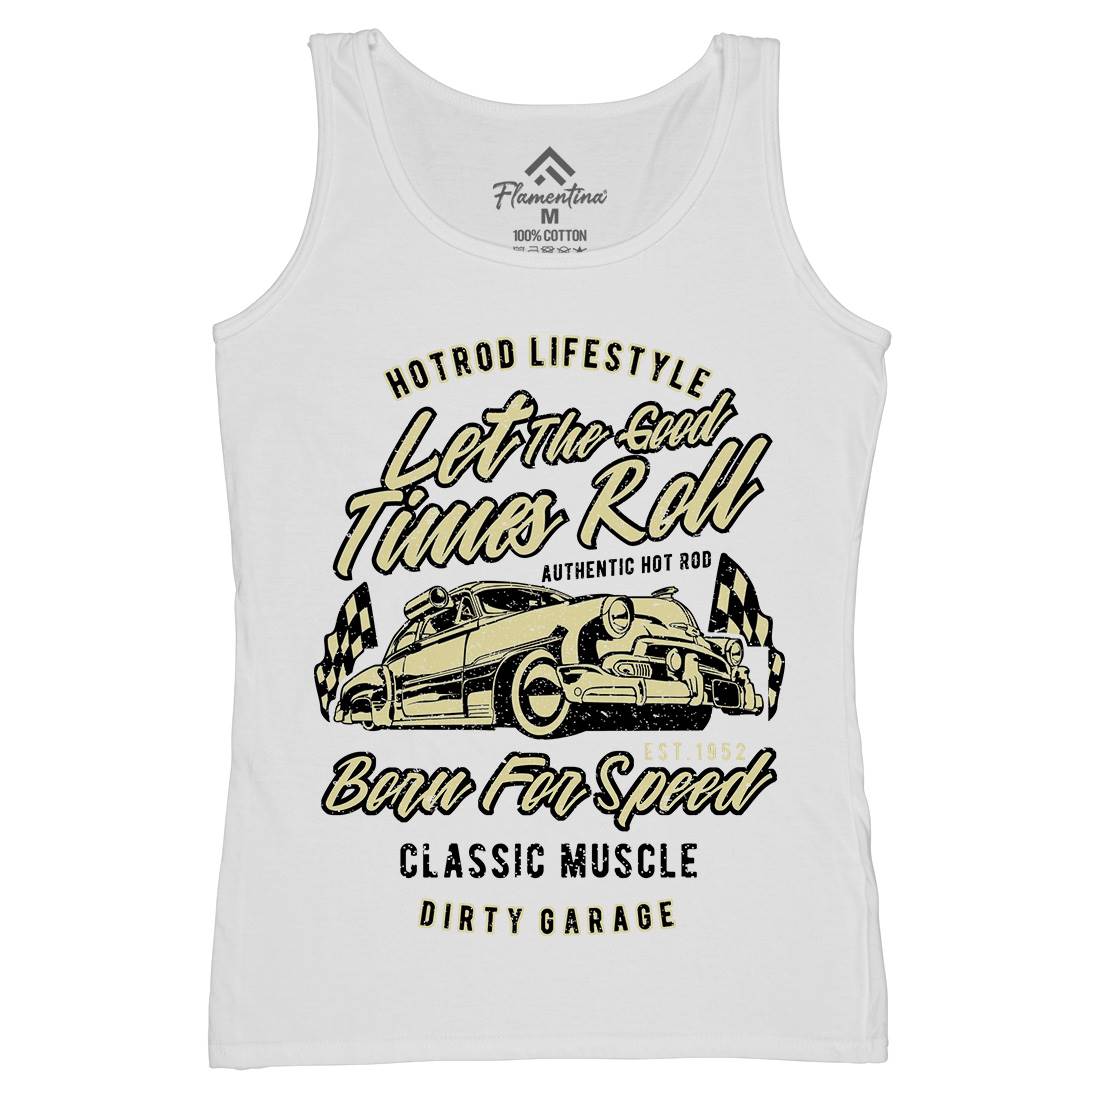 Let The Good Times Roll Womens Organic Tank Top Vest Cars A705